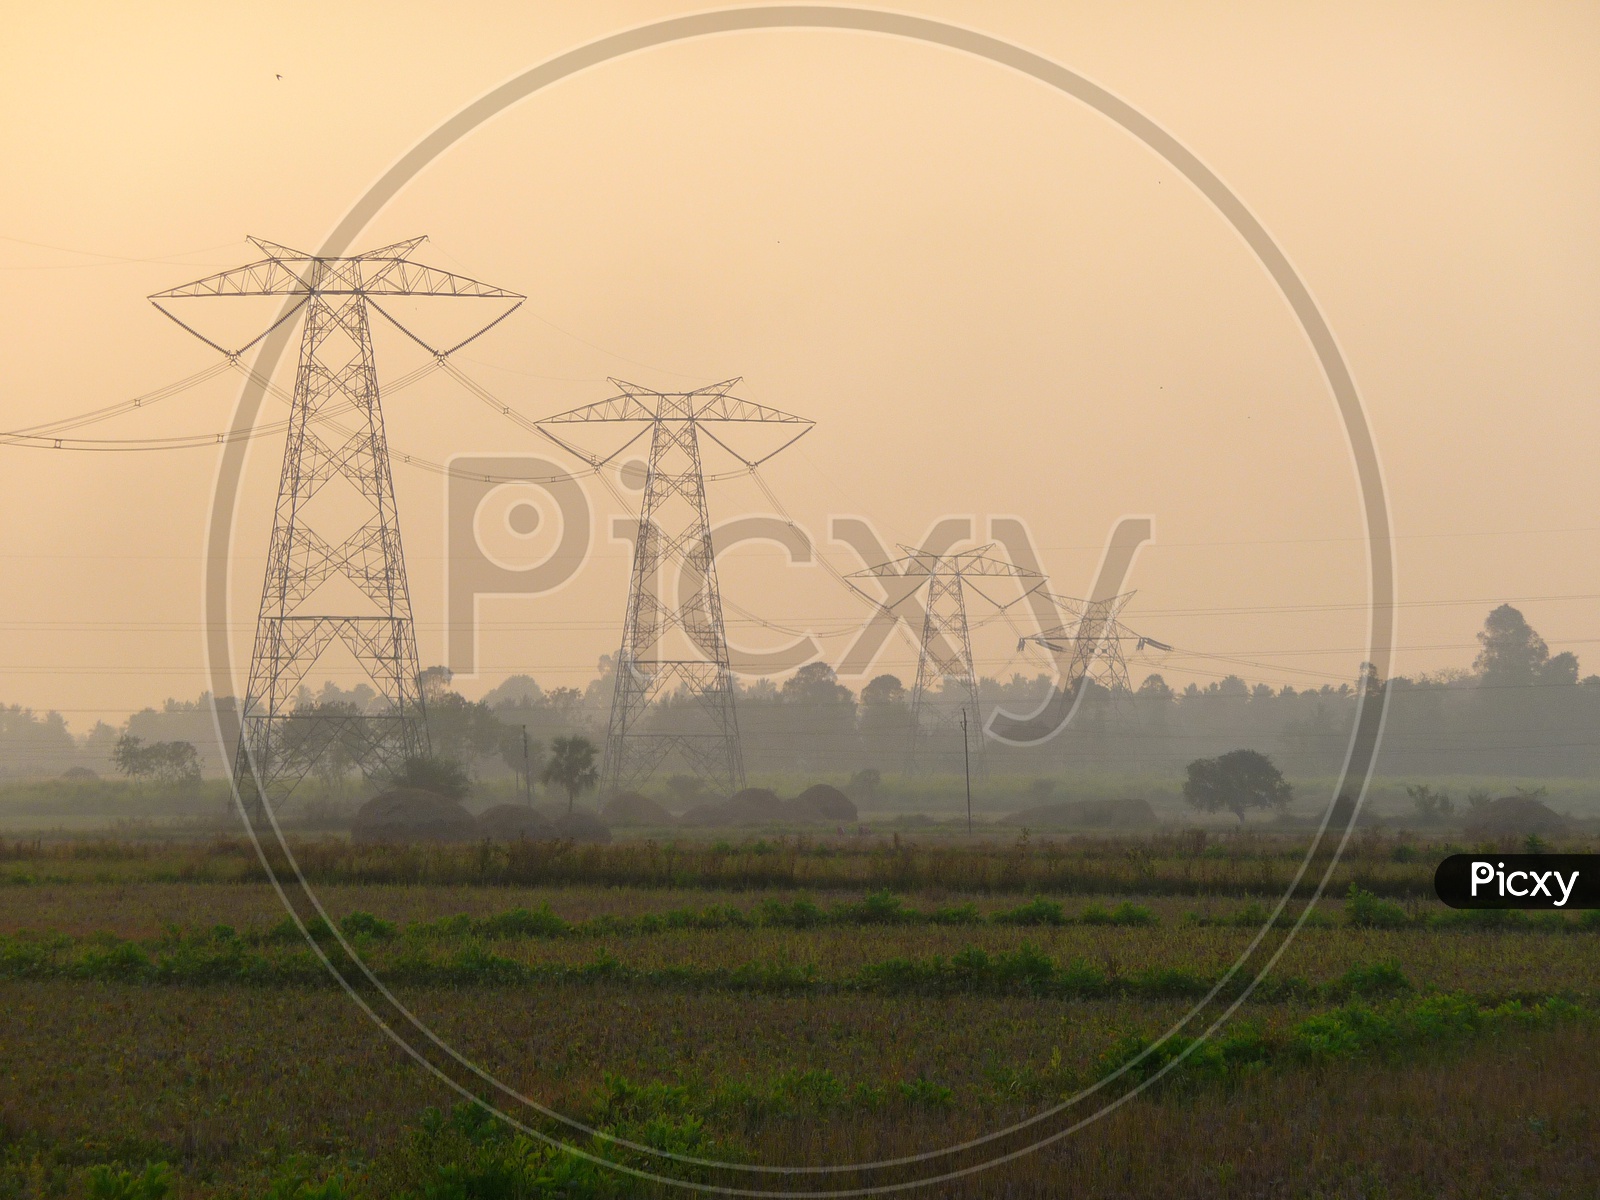 High Tension Wires in Agriculture Fields